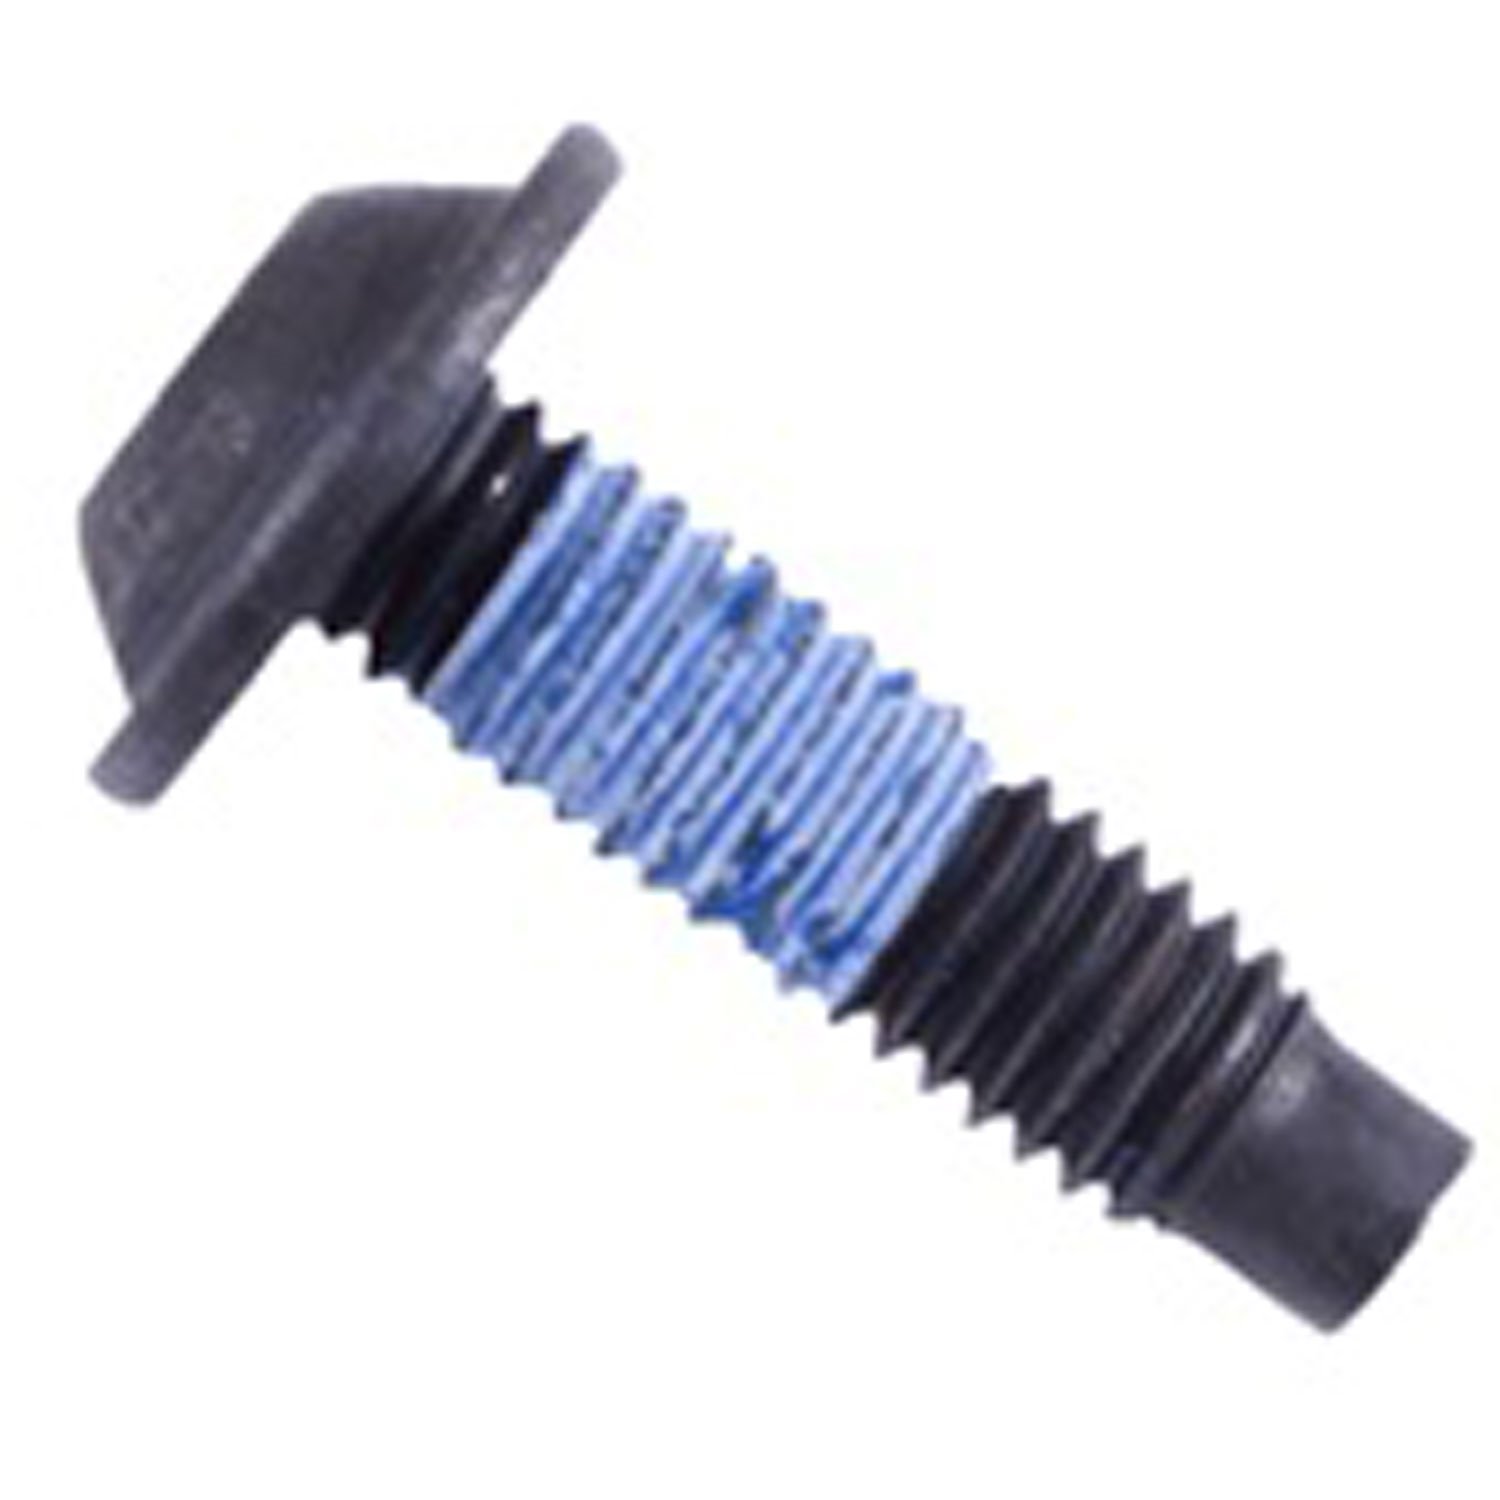 Replacement bumper end screw from Omix-ADA, Fits 97-06 Jeep Wrangler TJ